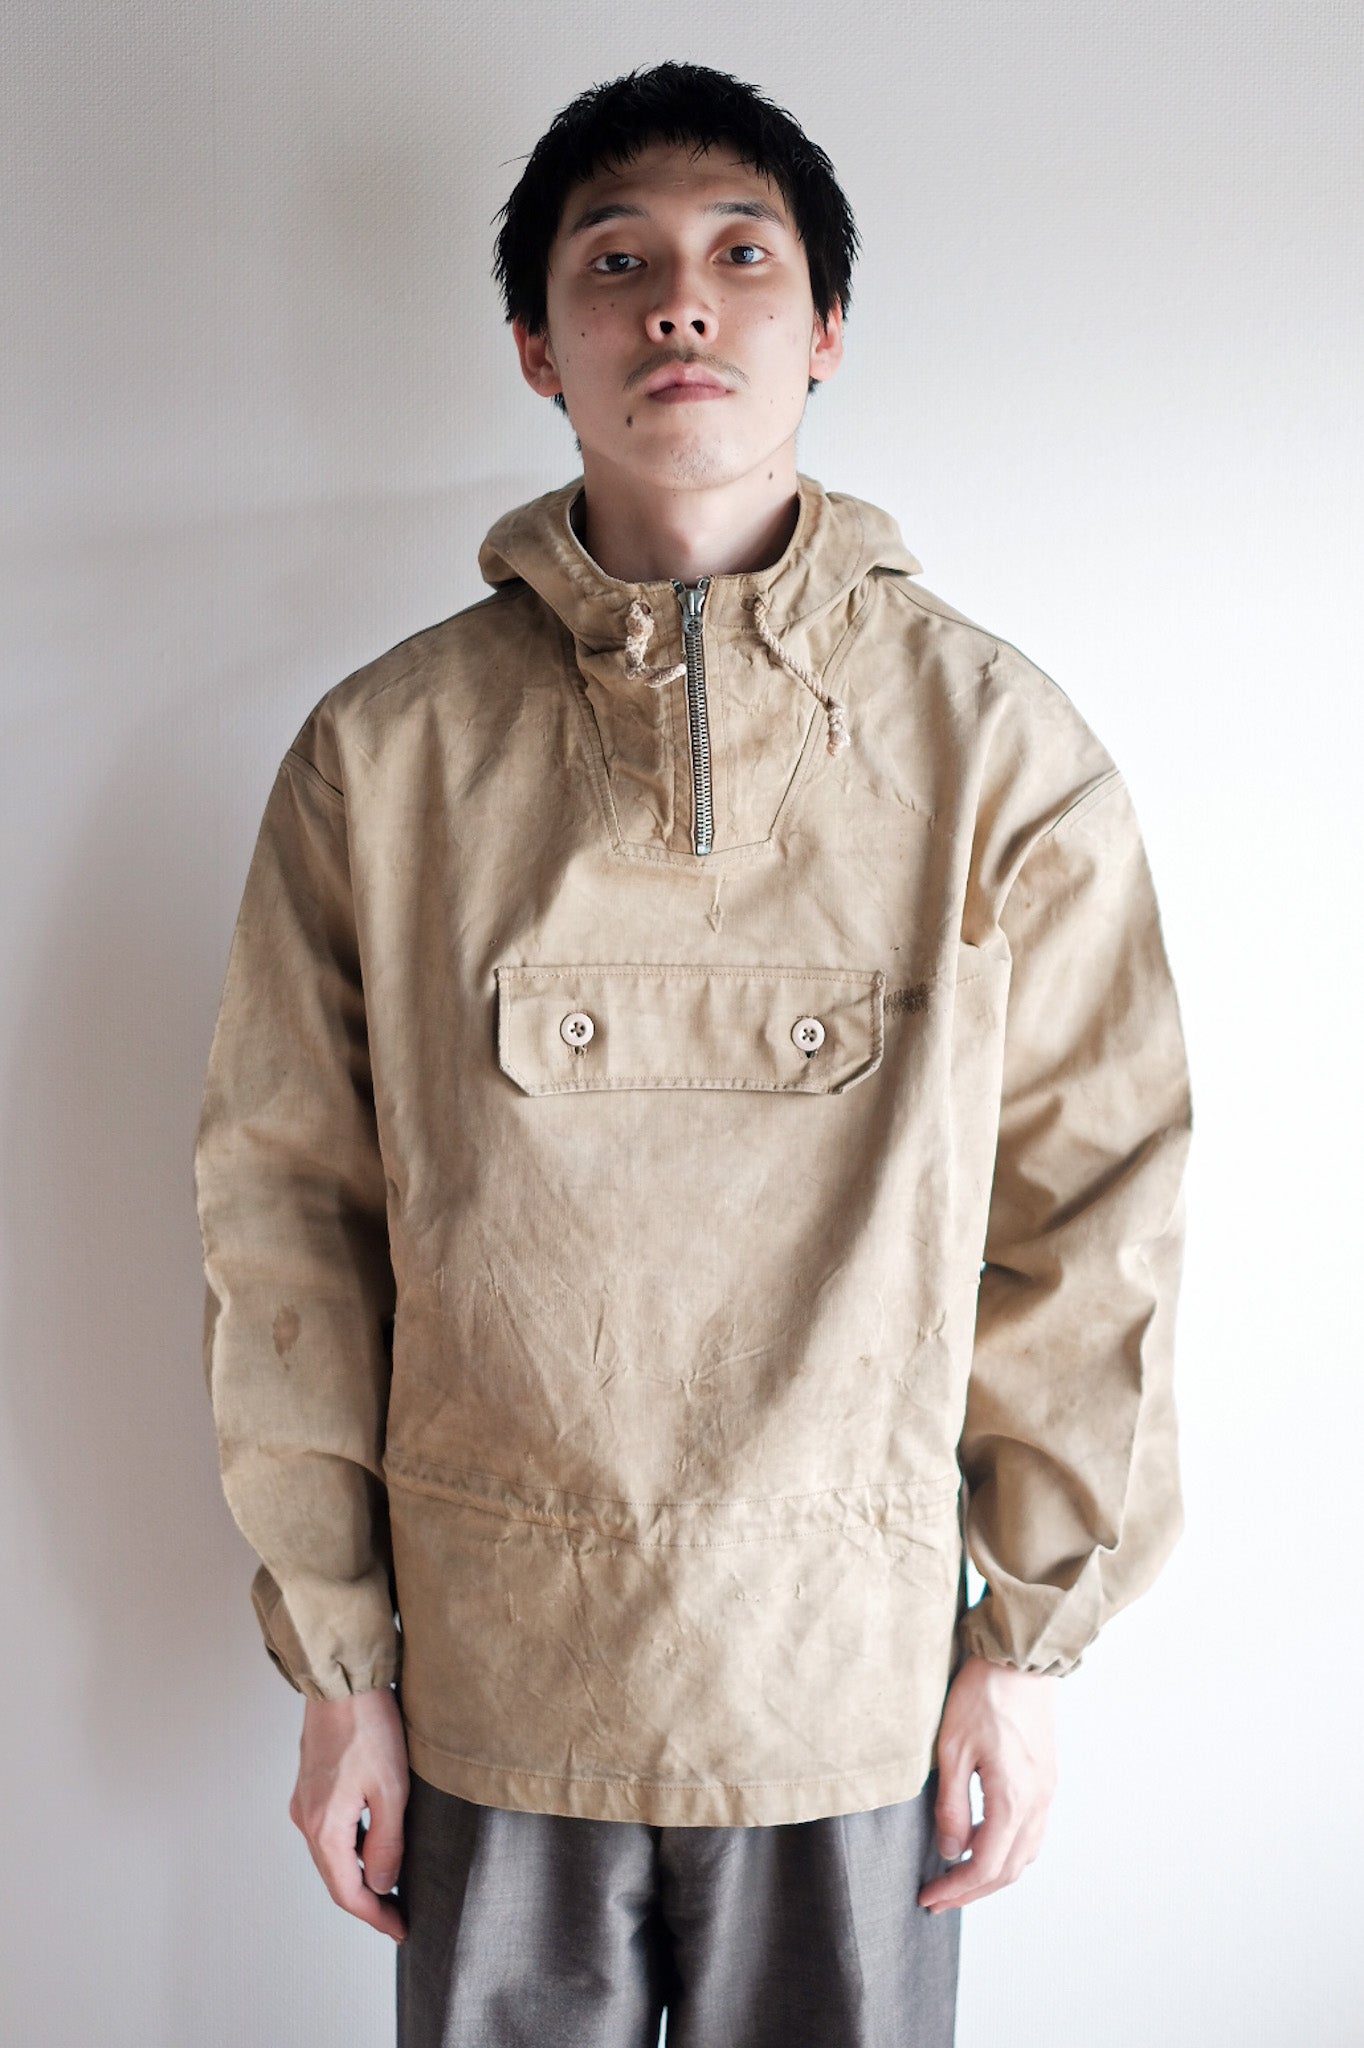 [~ 40's] Army Mountain Troopers Smock en caoutchouc